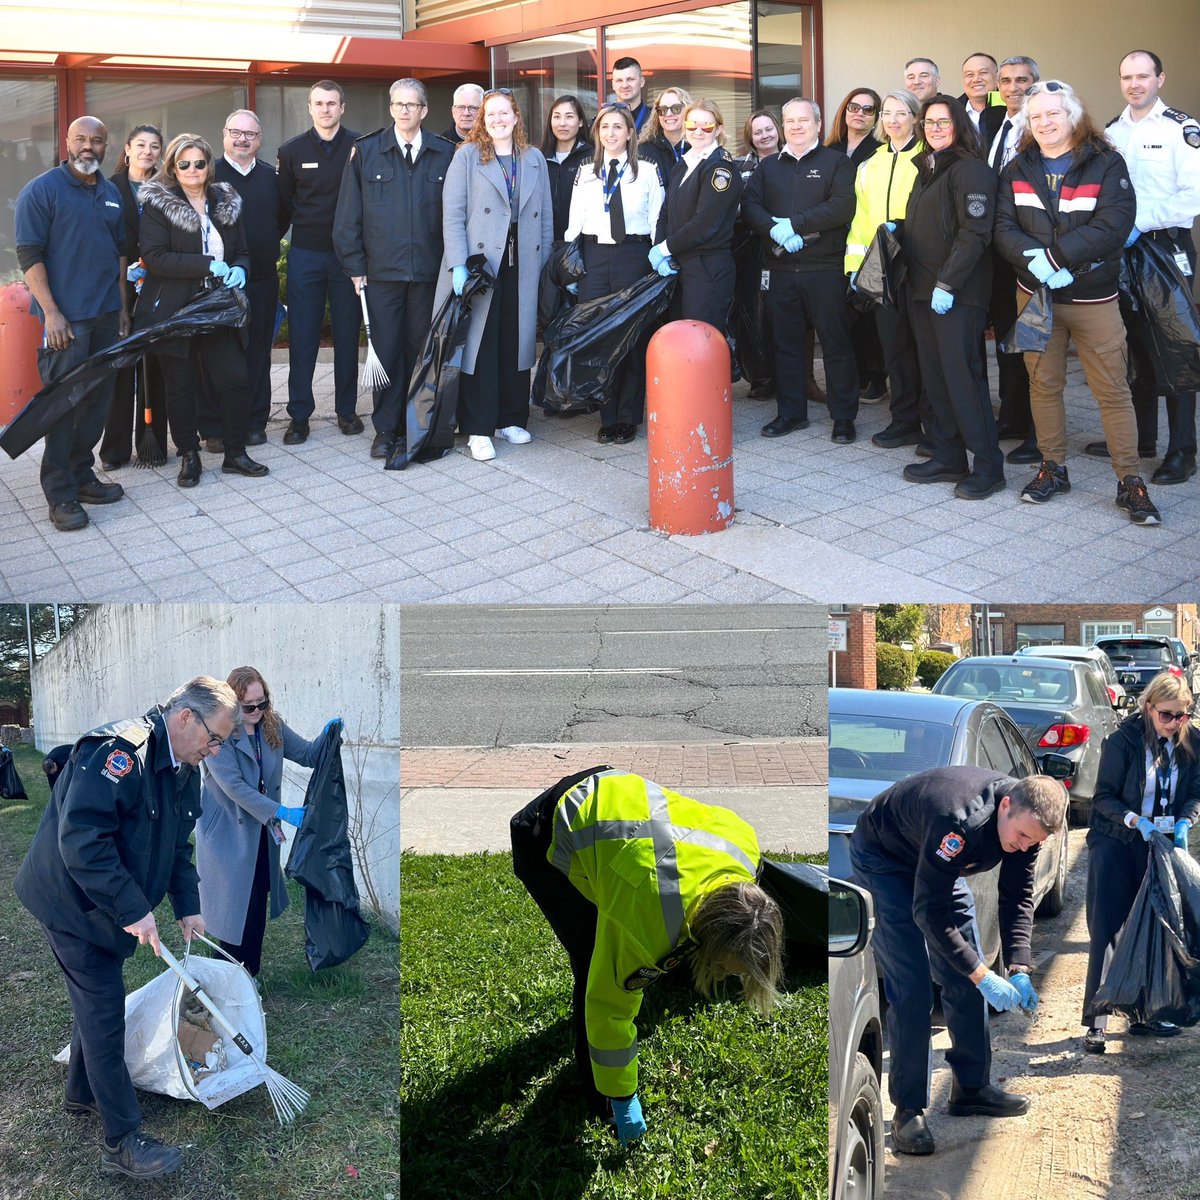 TFS and #Toronto Paramedics got together at our shared HQ facilities today to help keep the surrounding area clean as part of #CleanTorontoTogether efforts. Wishing all a safe and happy #EarthDay 🌎🙌